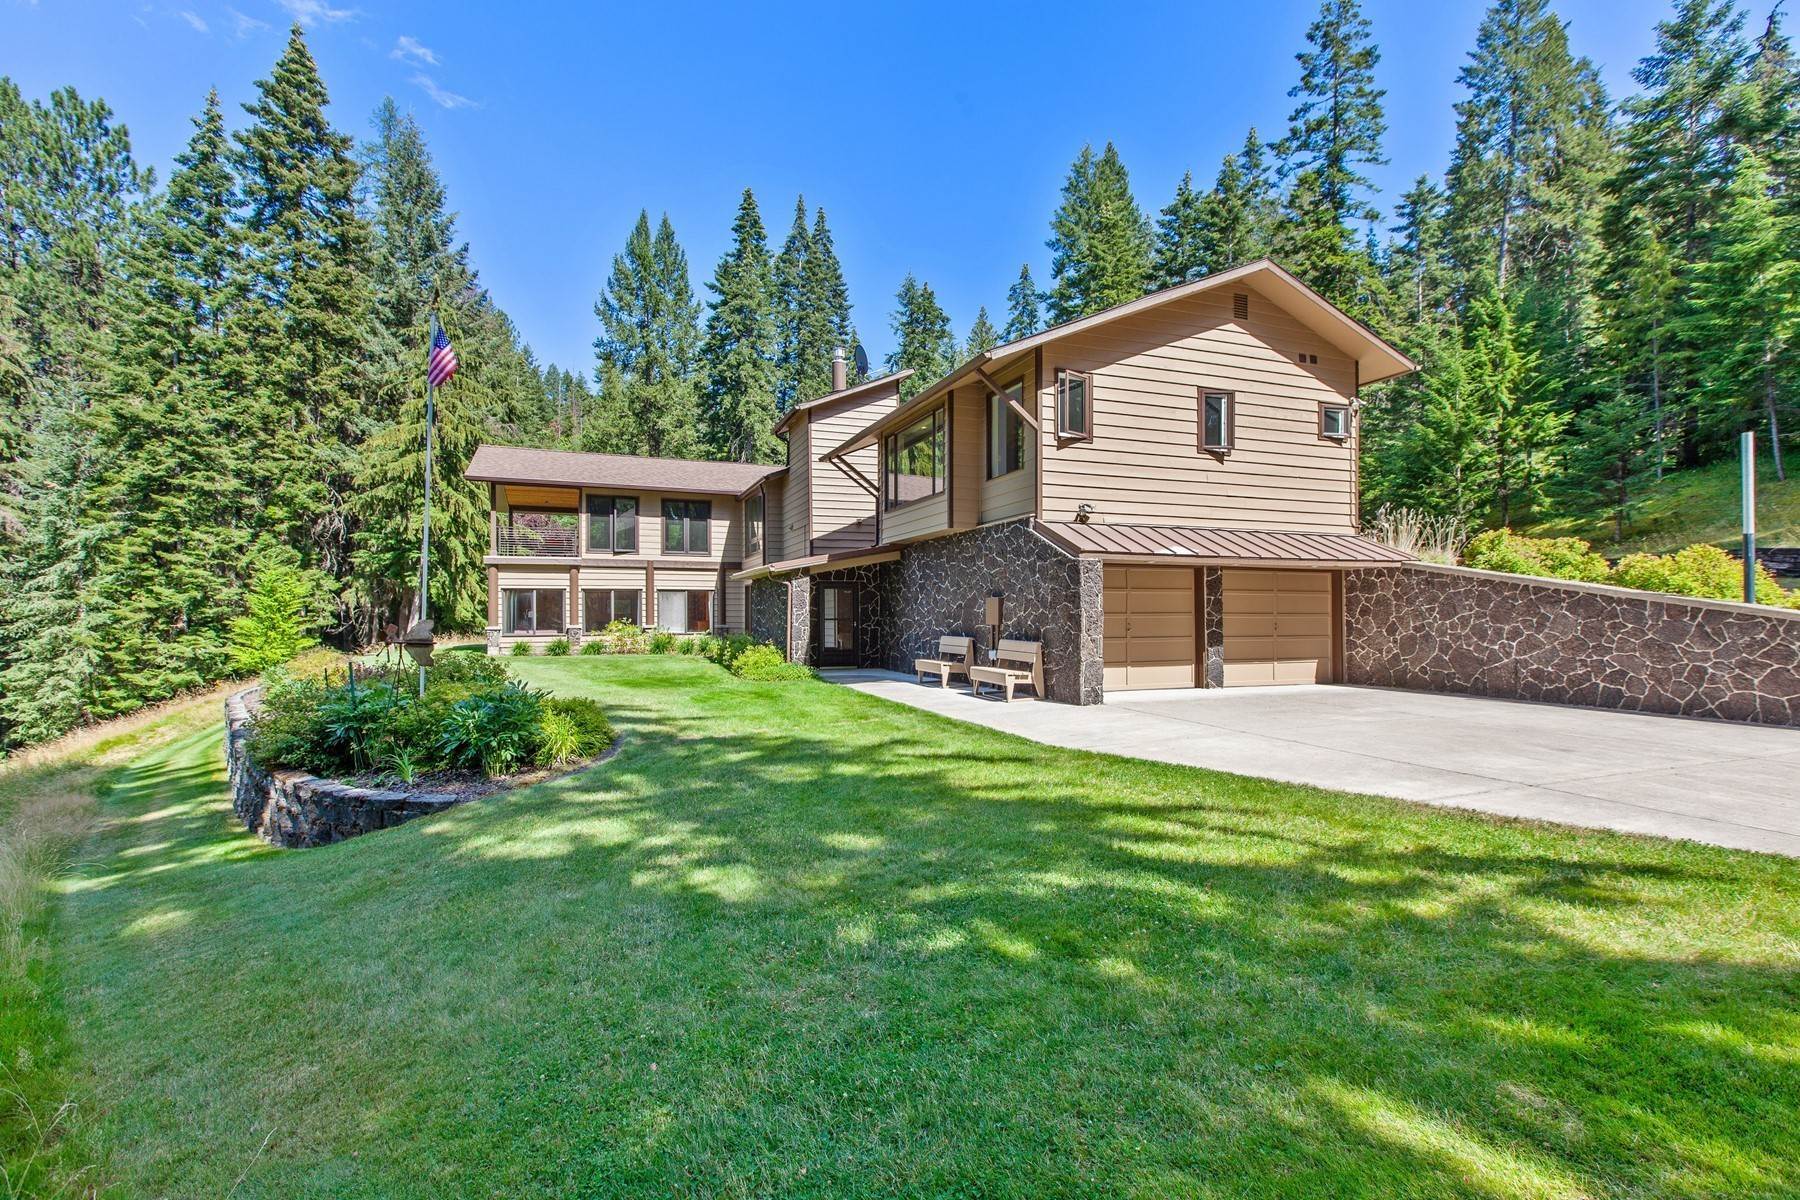 20. Single Family Homes for Sale at Hayden Lake Mountain Retreat 7285 Henry Point Rd Hayden, Idaho 83835 United States